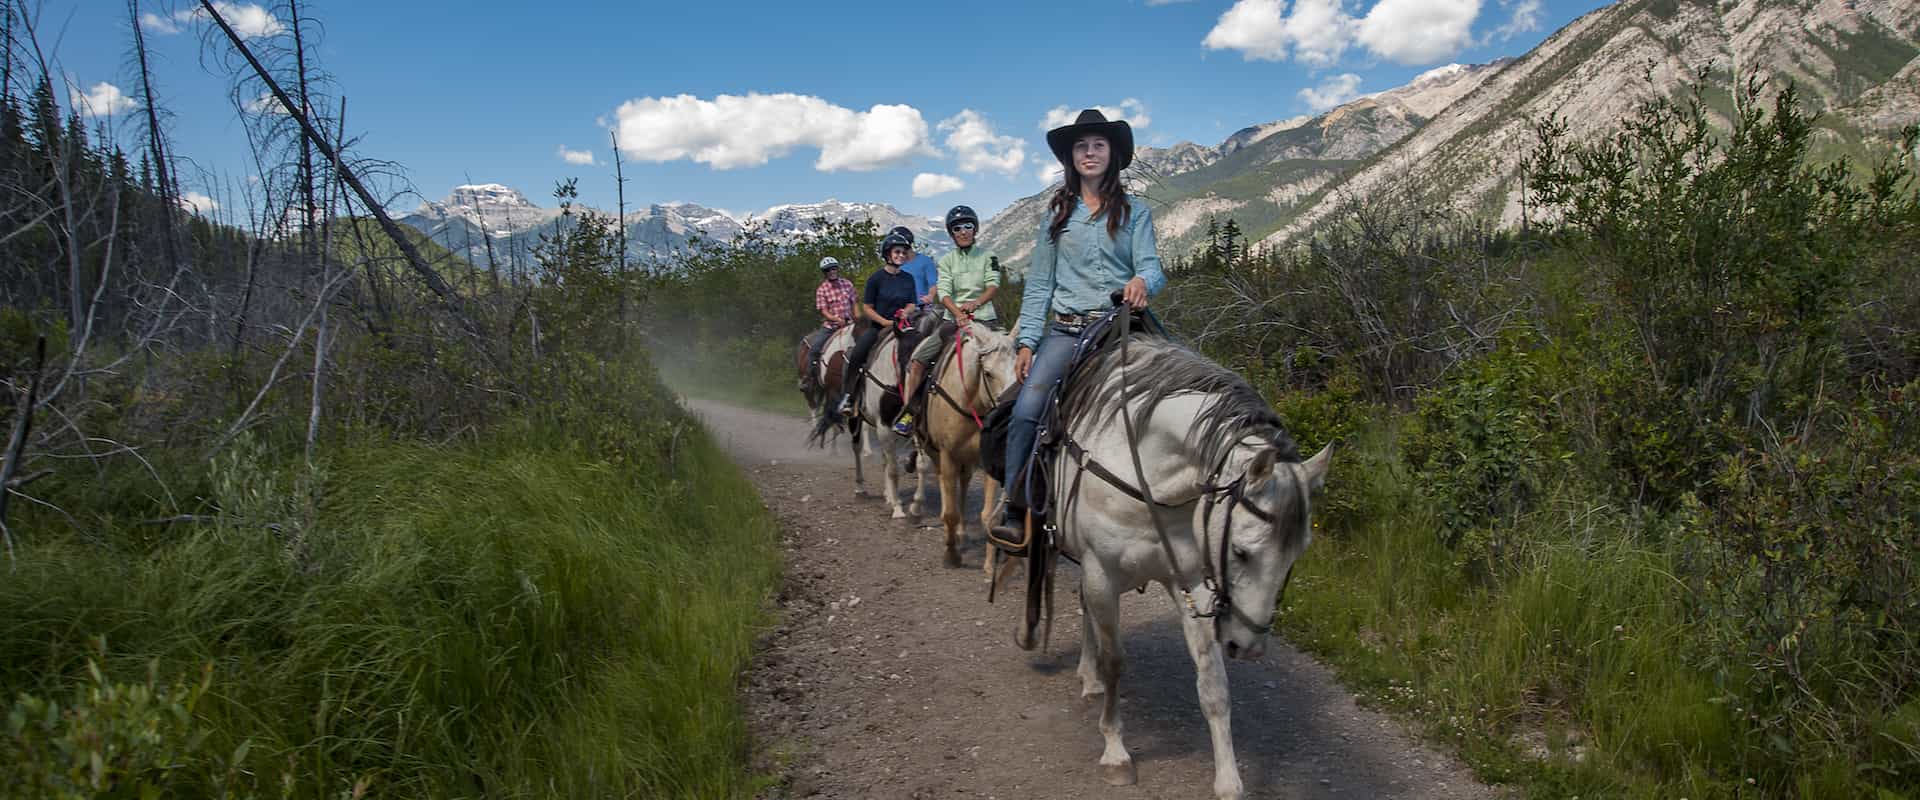 Follow your guide on a scenic Bow River horseback ride with Banff Trail Riders in the Canadian Rockies